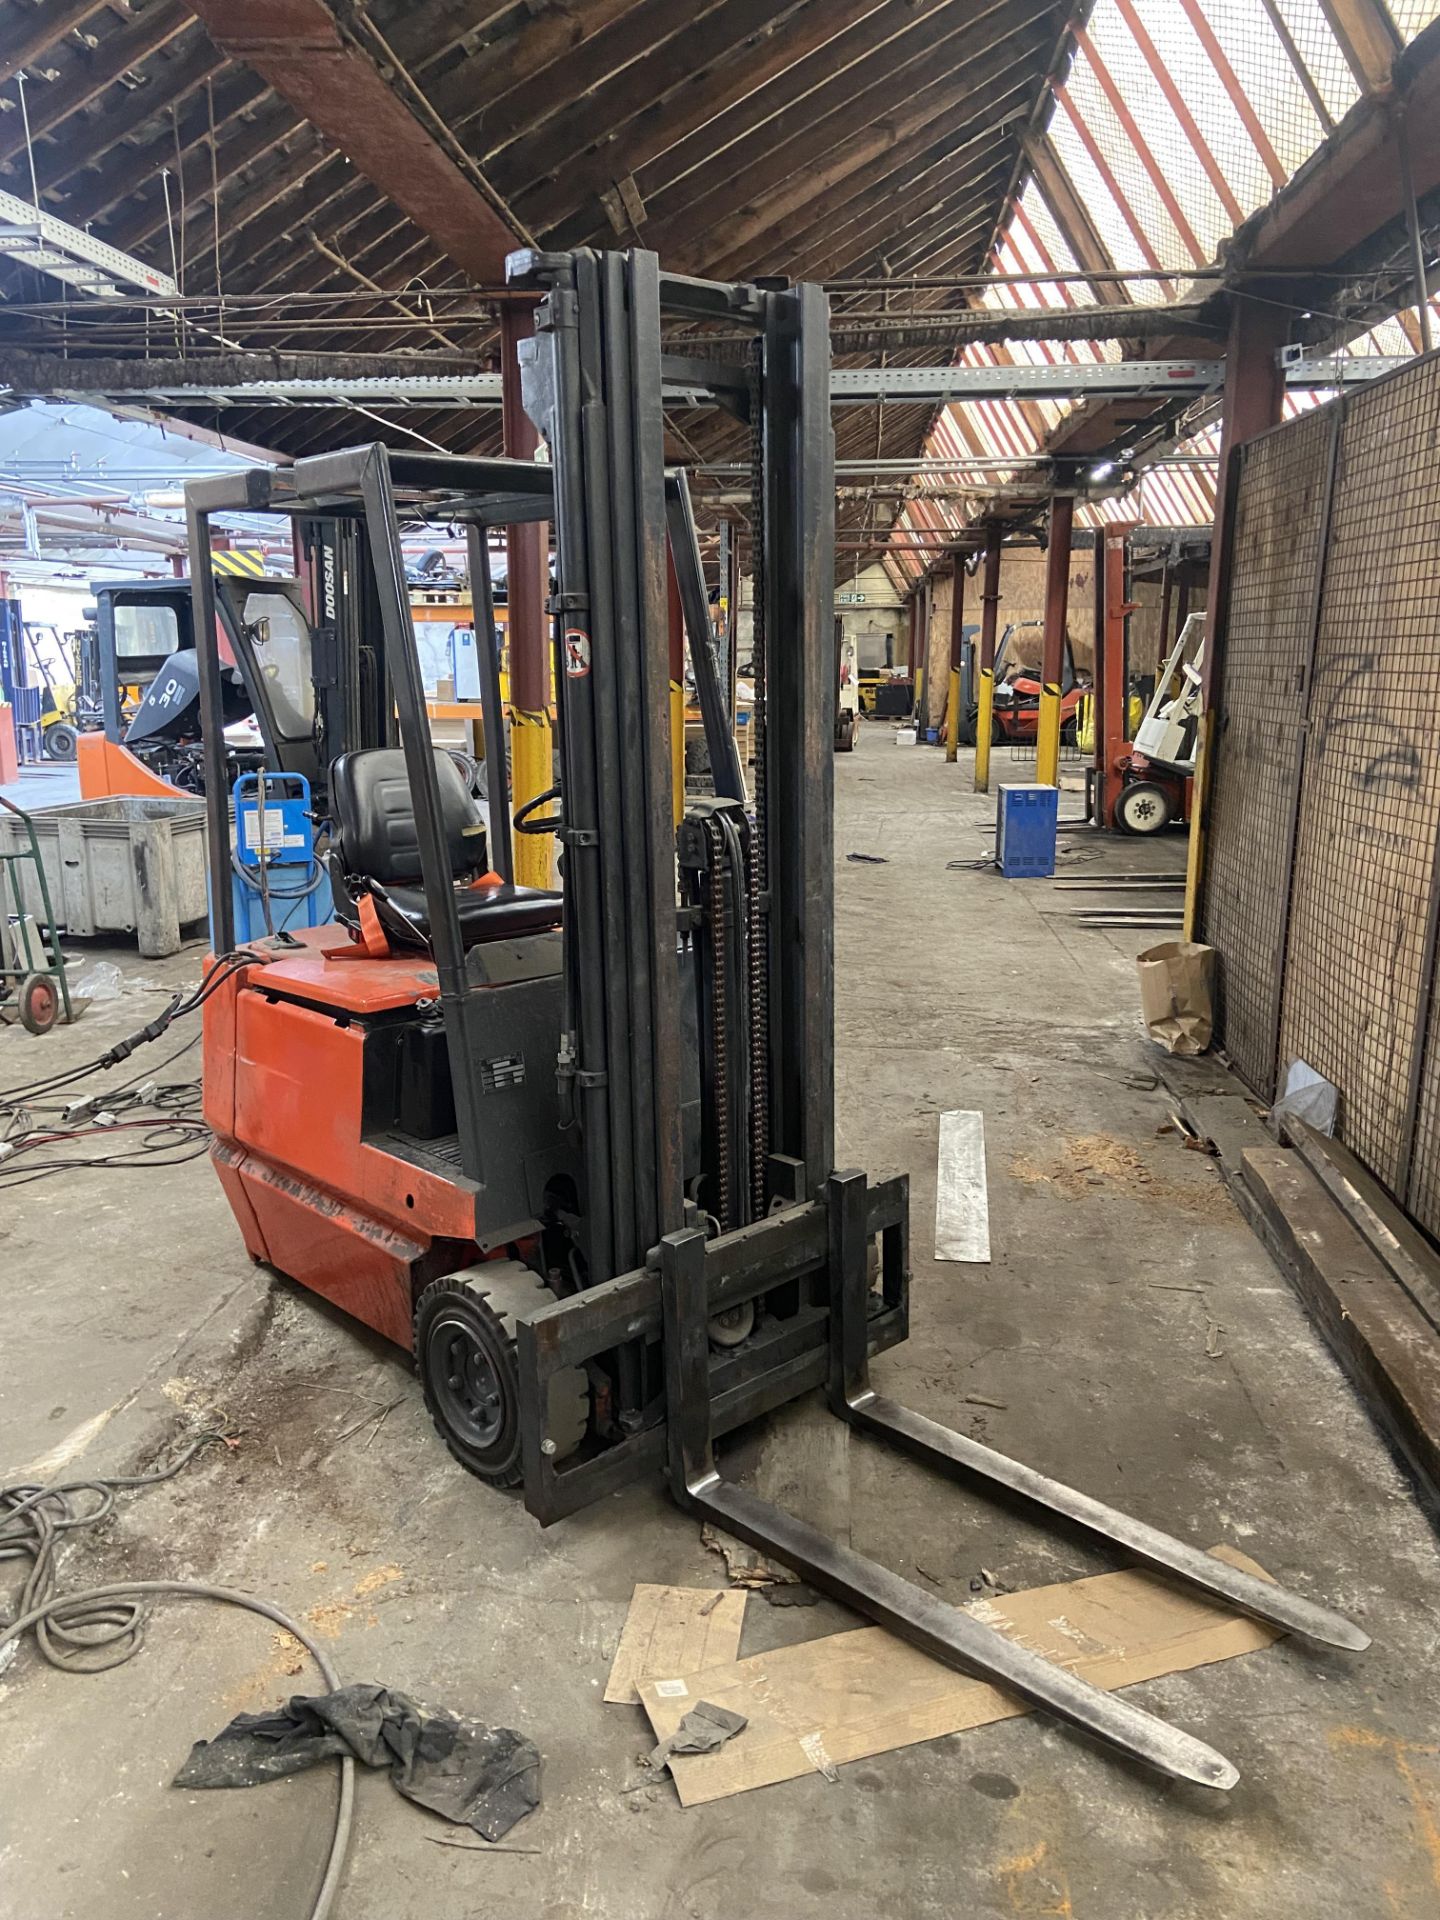 Lansing Linde E15C 1500kg cap. Electric Fork Lift Truck, serial no. 322E07008115, year of